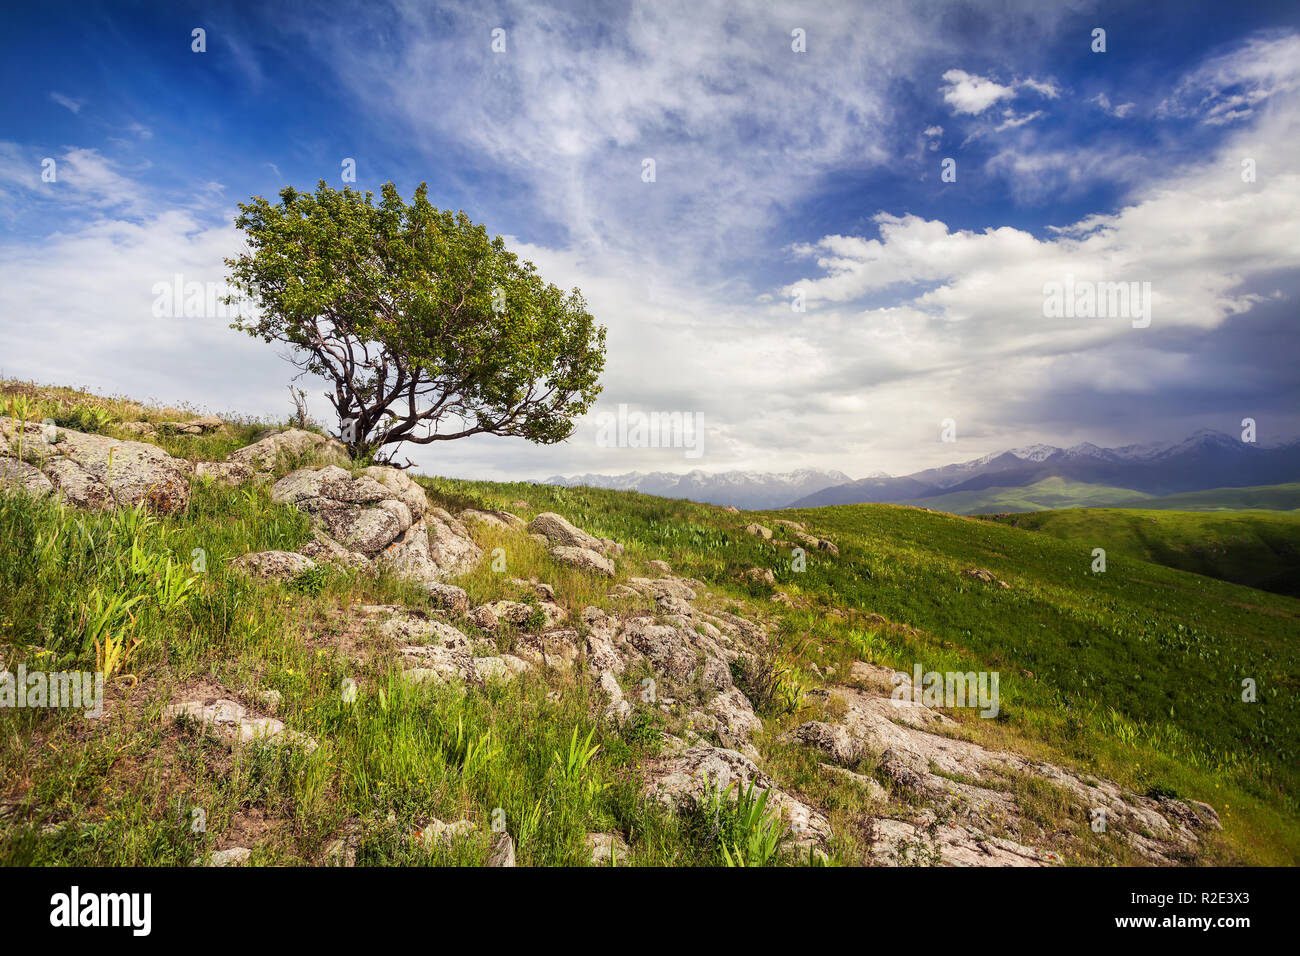 Lonely tree in the mountains at dramatic cloudy sky in Ushkonyr near Chemolgan, Kazakhstan, central Asia Stock Photo